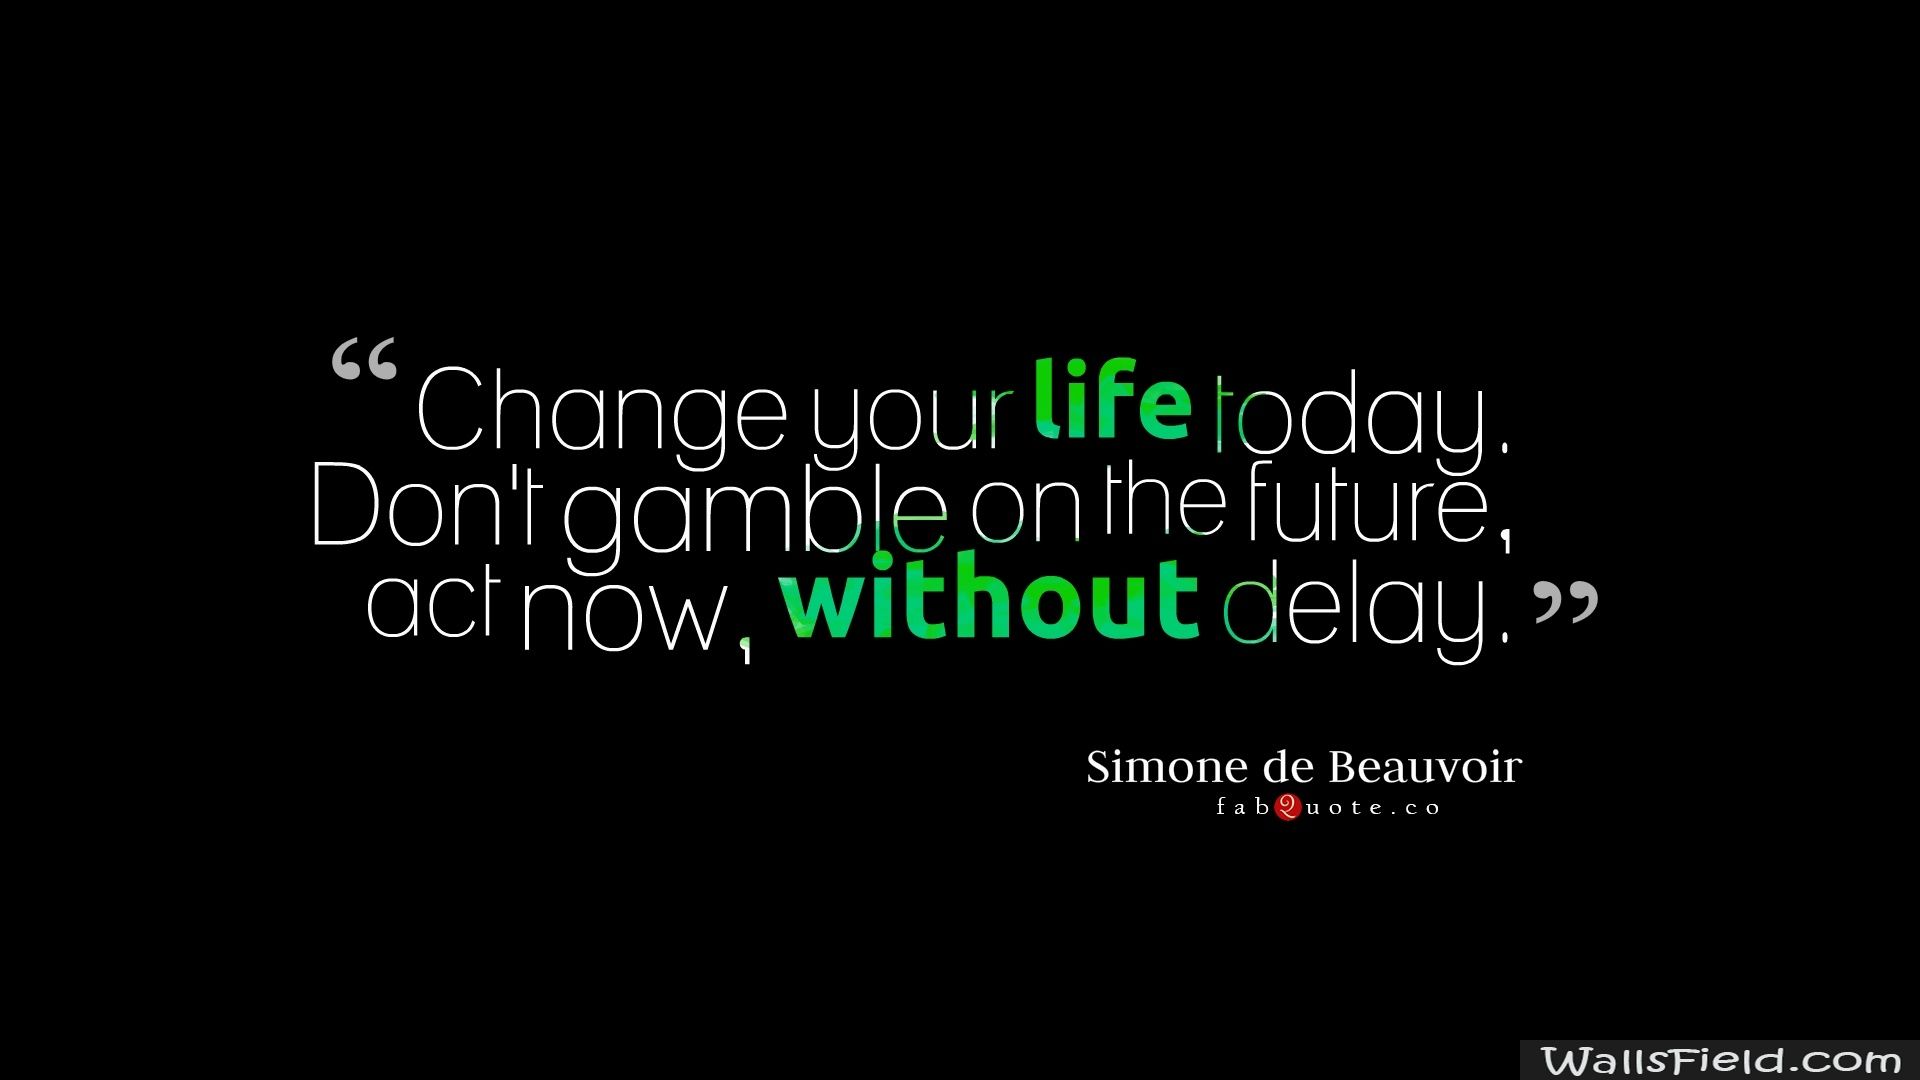 Change Your Life Today.com. Free HD Wallpaper. Today quotes, Free life quotes, Life quotes wallpaper